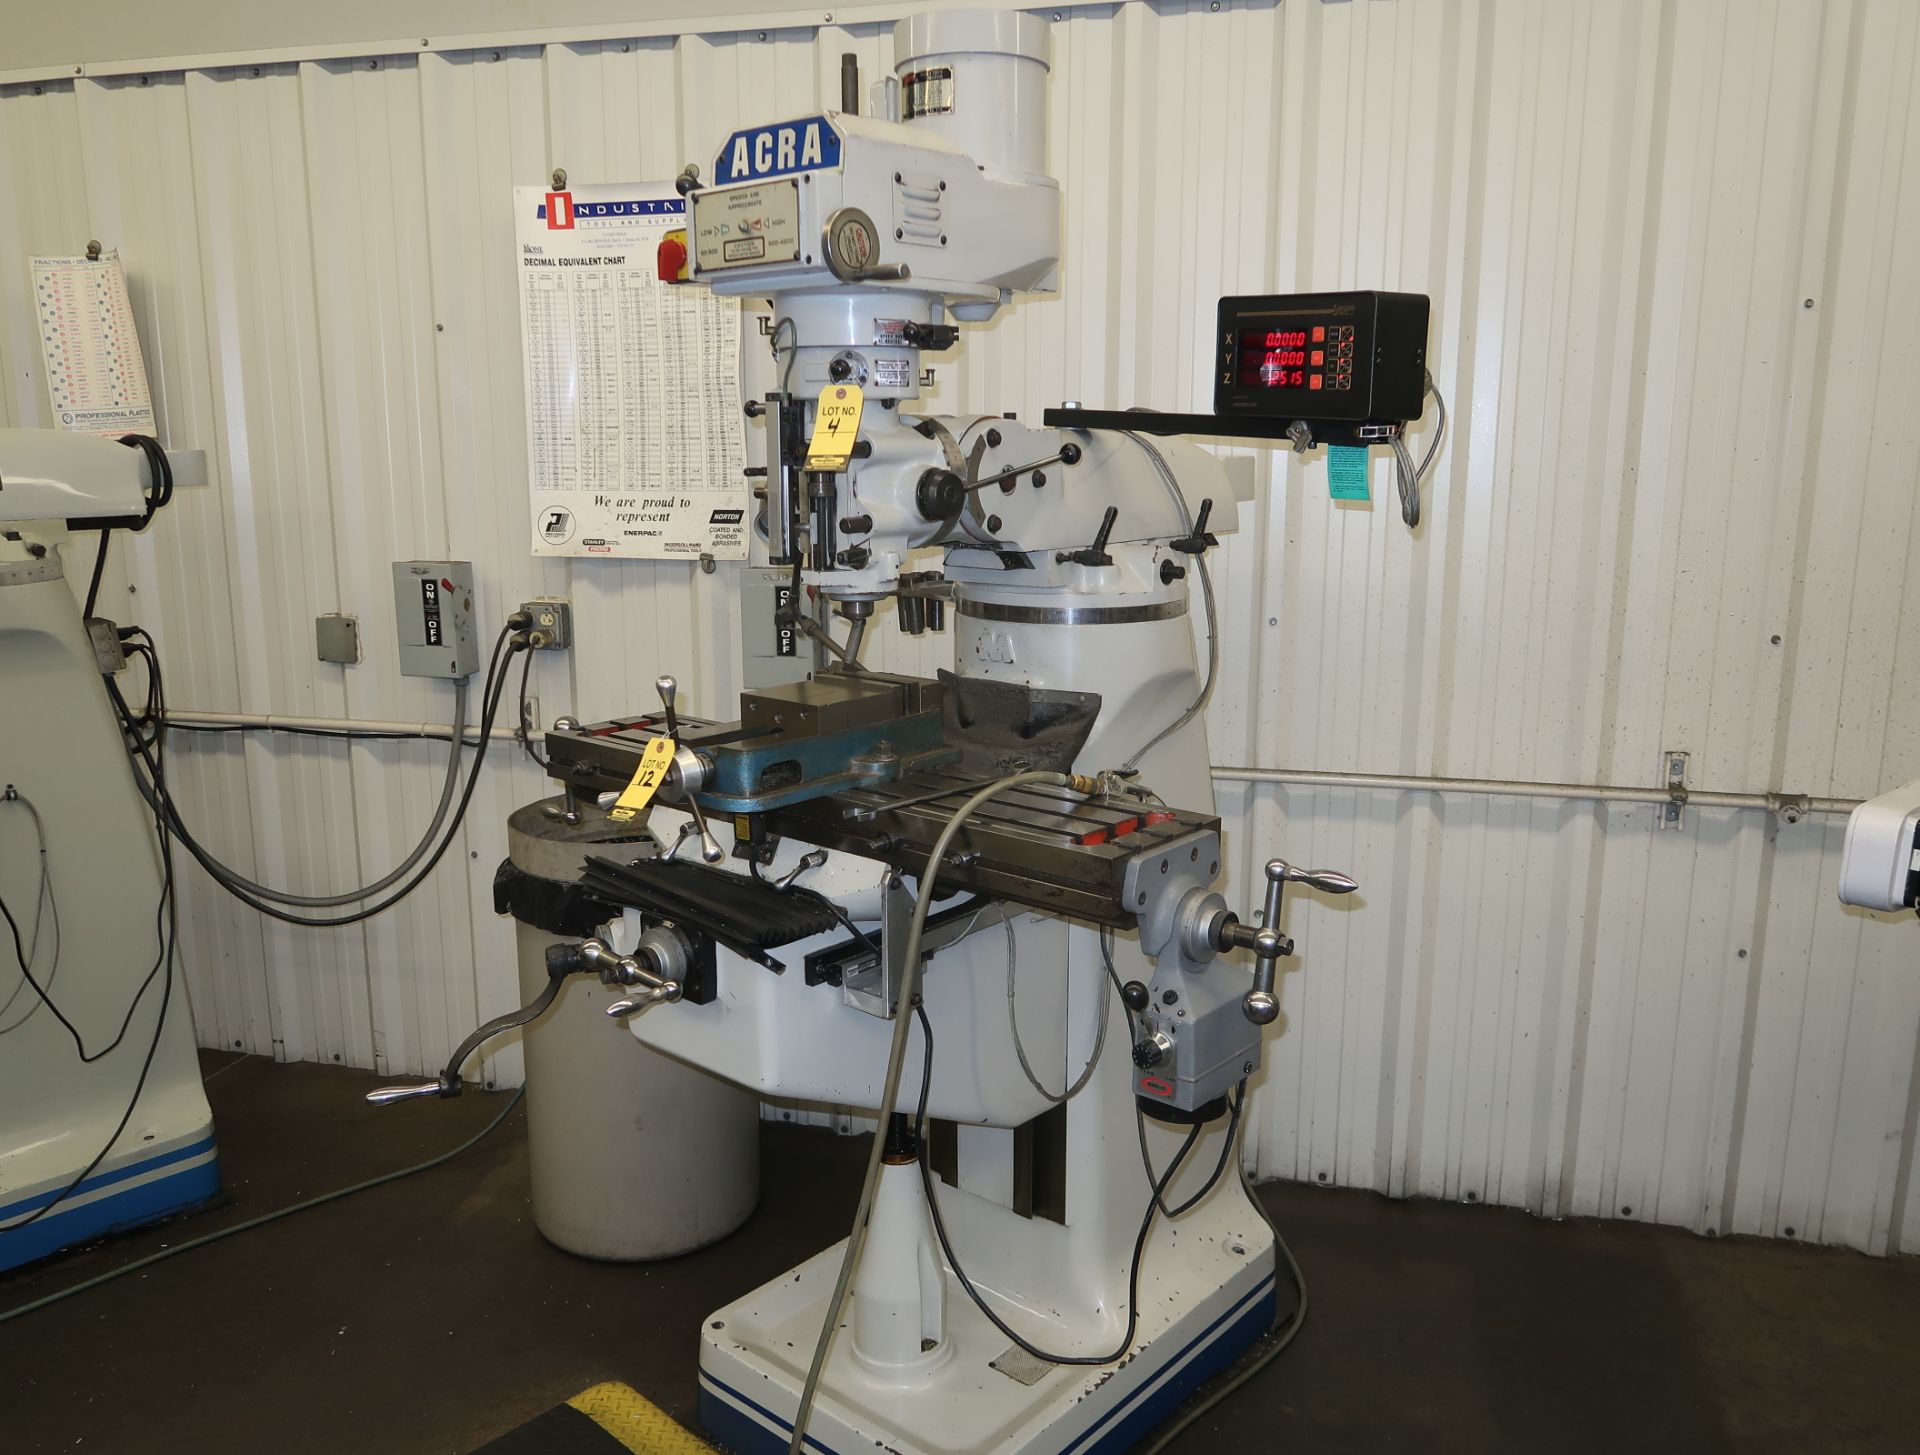 ACRA MDL. AM-2S VERTICAL MILL, 9" x 42" TABLE, 2-AXIS DRO, POWER FEED, SN. 86 - Image 2 of 4